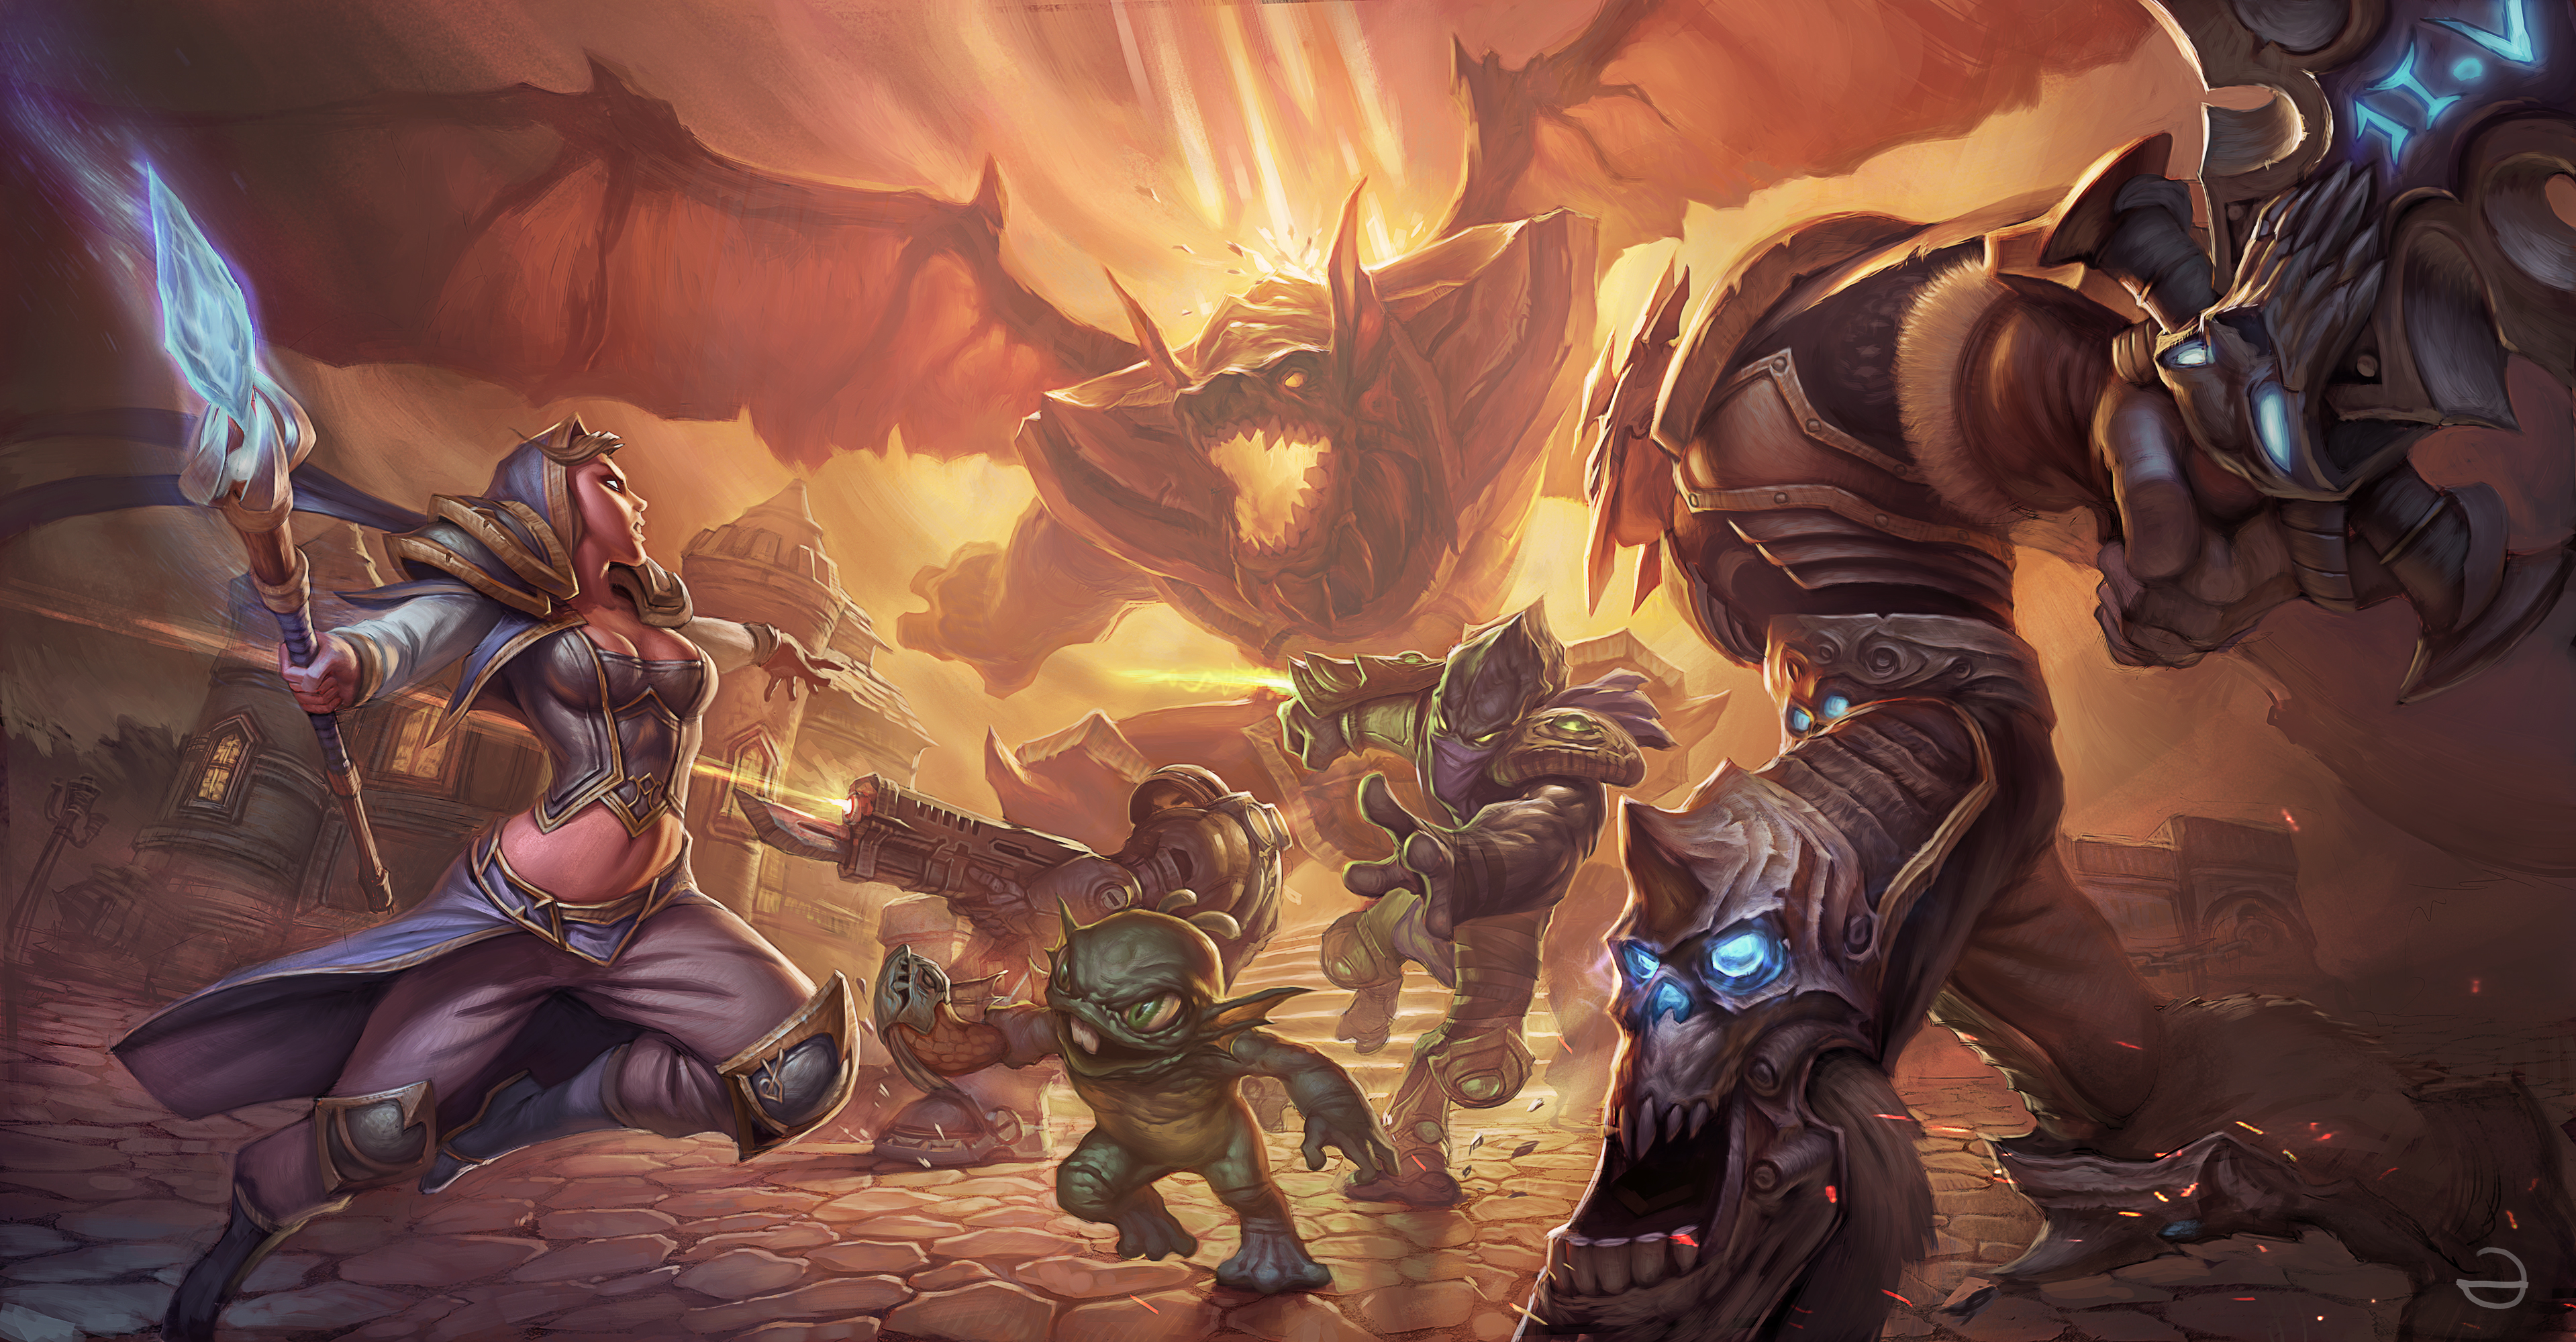 heroes of the storm wallpaper 1920x1080,action adventure game,pc game,strategy video game,cg artwork,adventure game